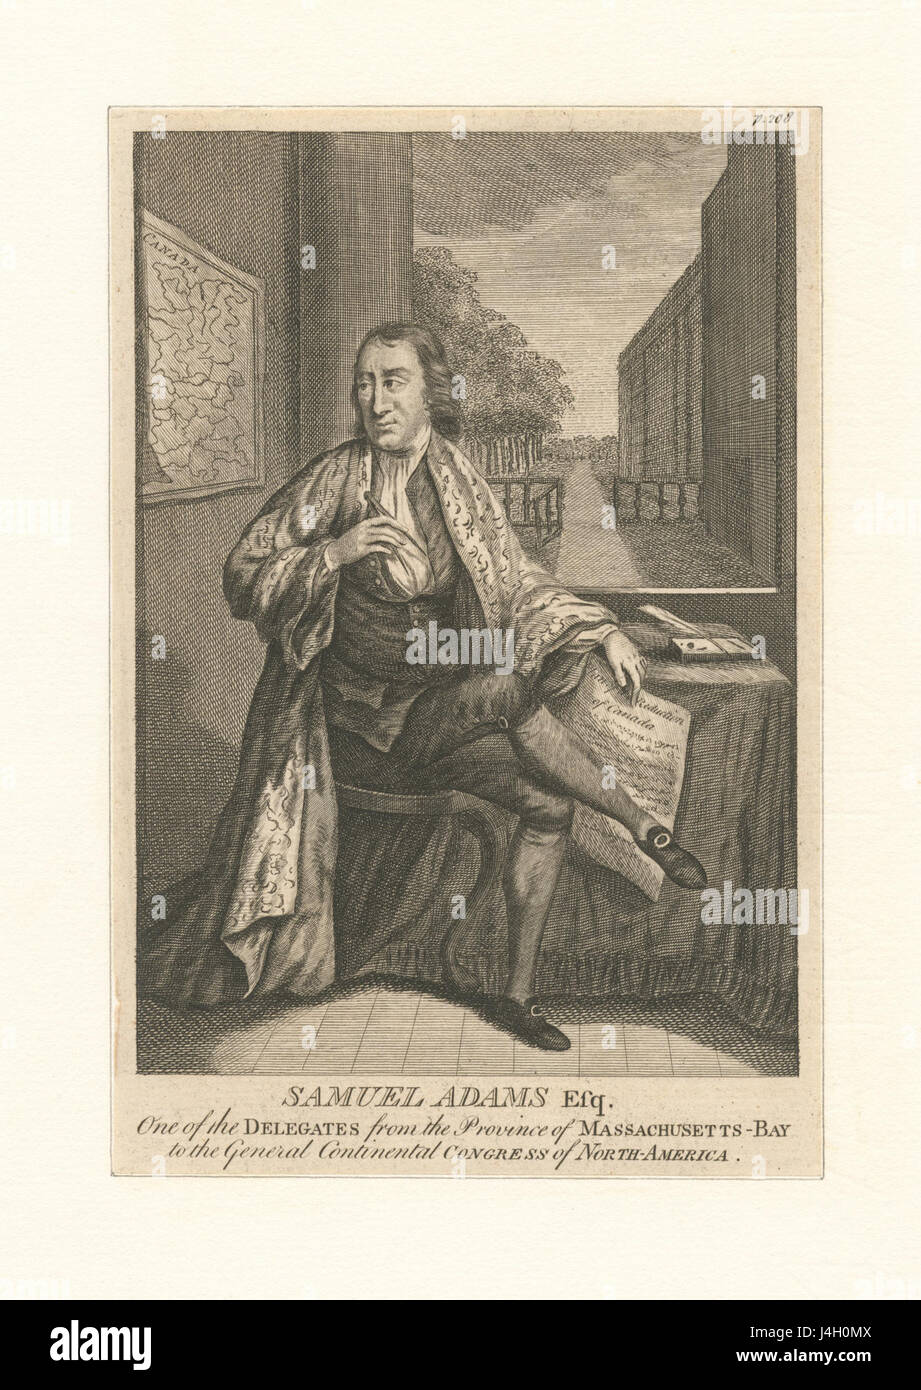 Samuel Adams Esq., one of the delegates from the Province of Massachusetts Bay to the general Continental Congress of North America (NYPL Hades 280022 EM3331) Stock Photo